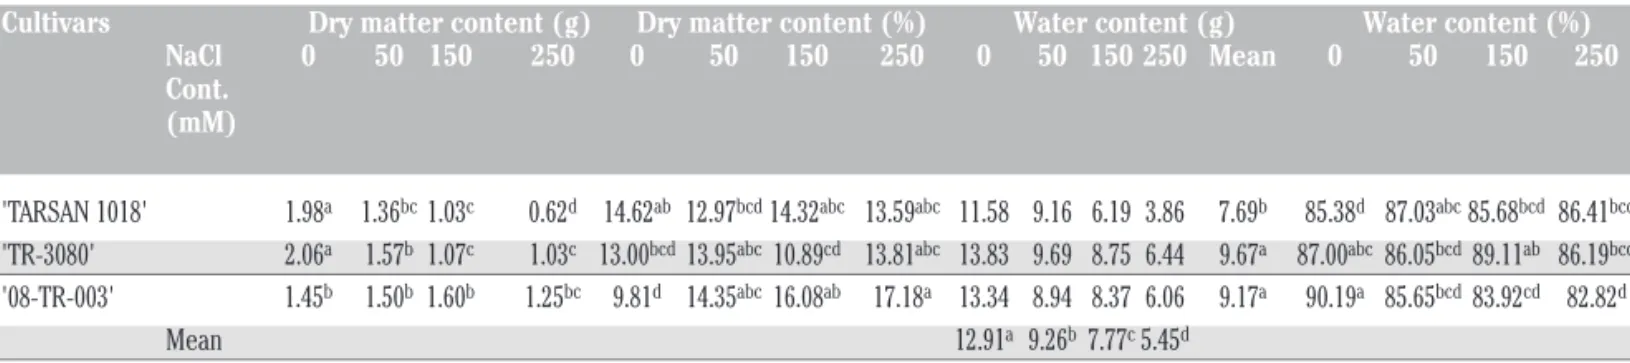 Table 4. The effect of different cultivars and salt concentrations on dry matter and water content in sunflower.